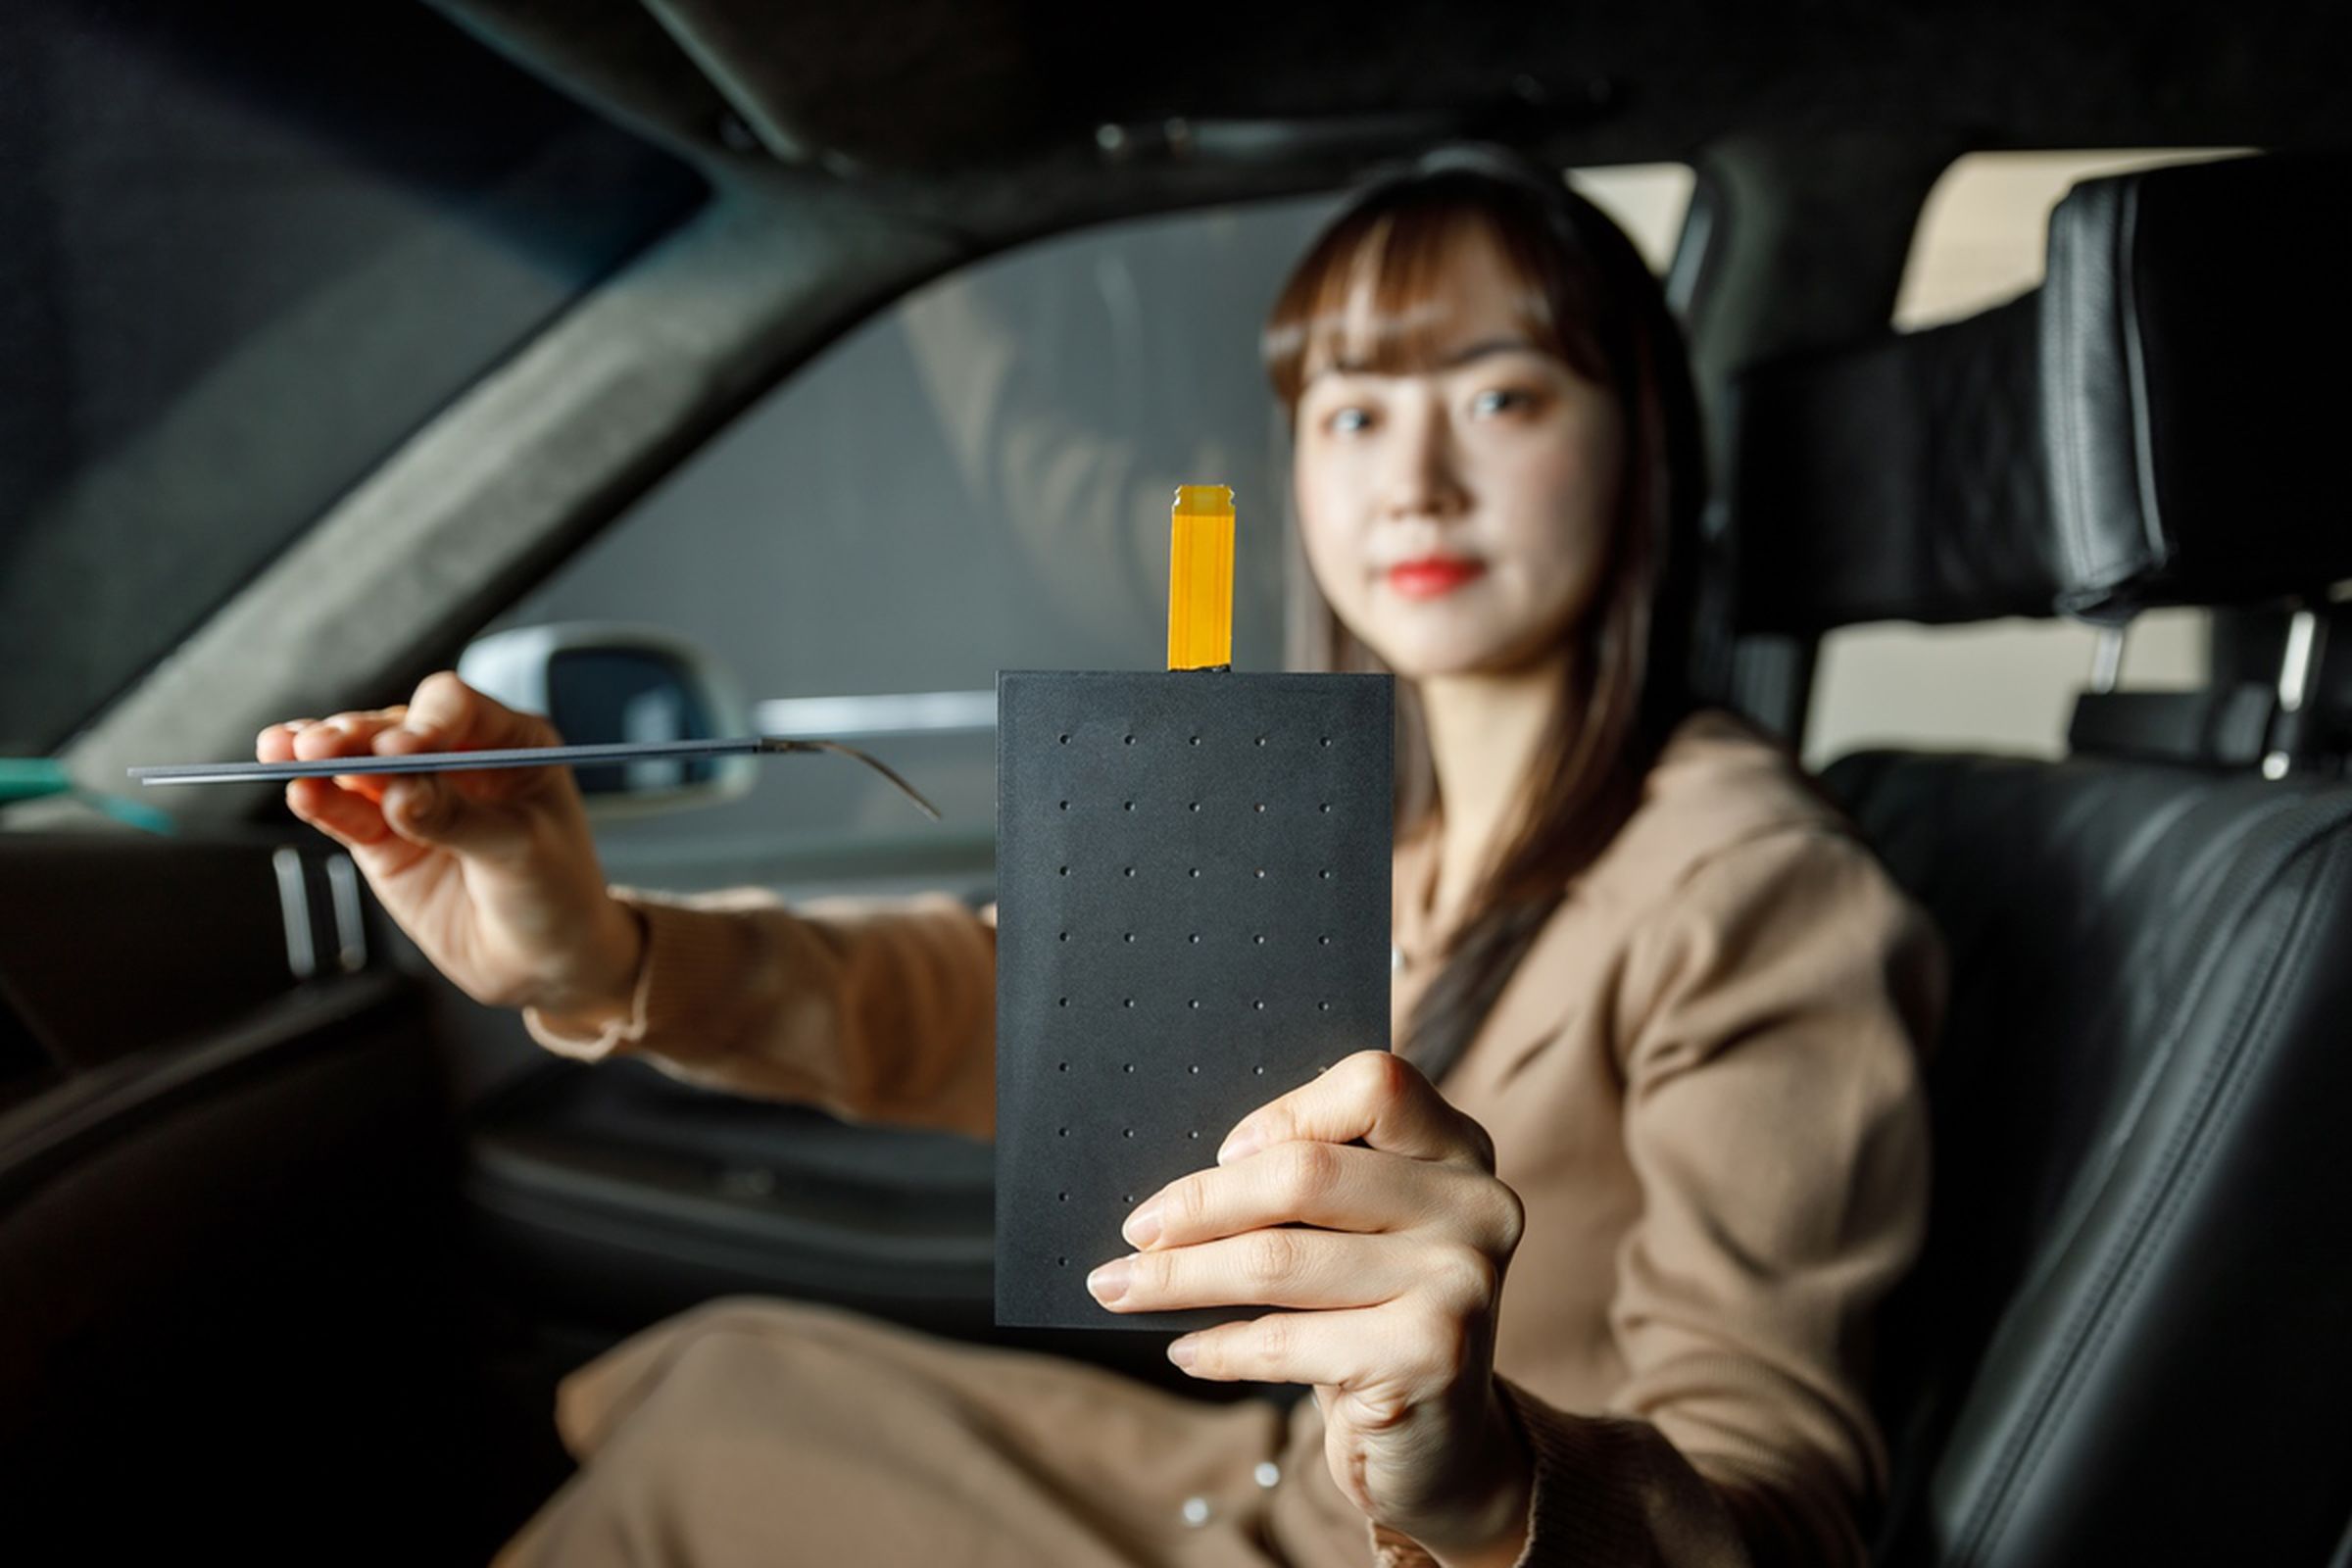 A woman in a car, holding LG Display’s Thin Actuator Sound Solution panel. The panel is a slim, black slab of plastic-looking material.